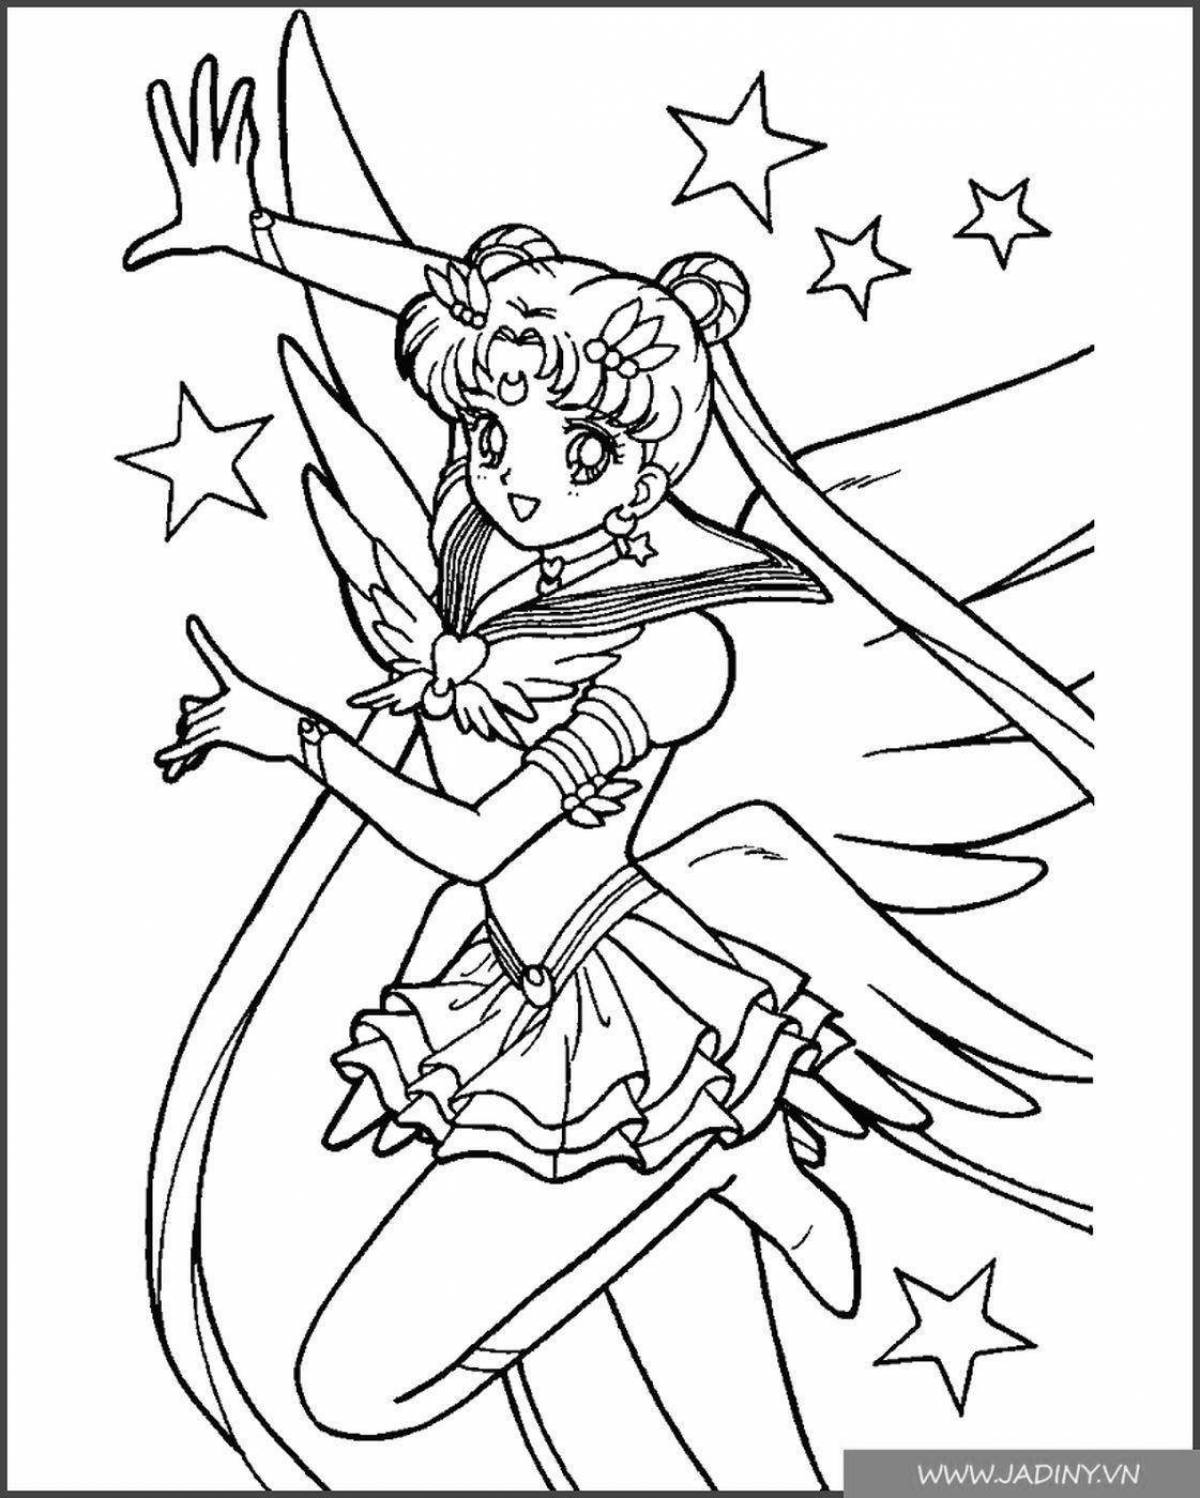 Glorious sailor moon coloring page